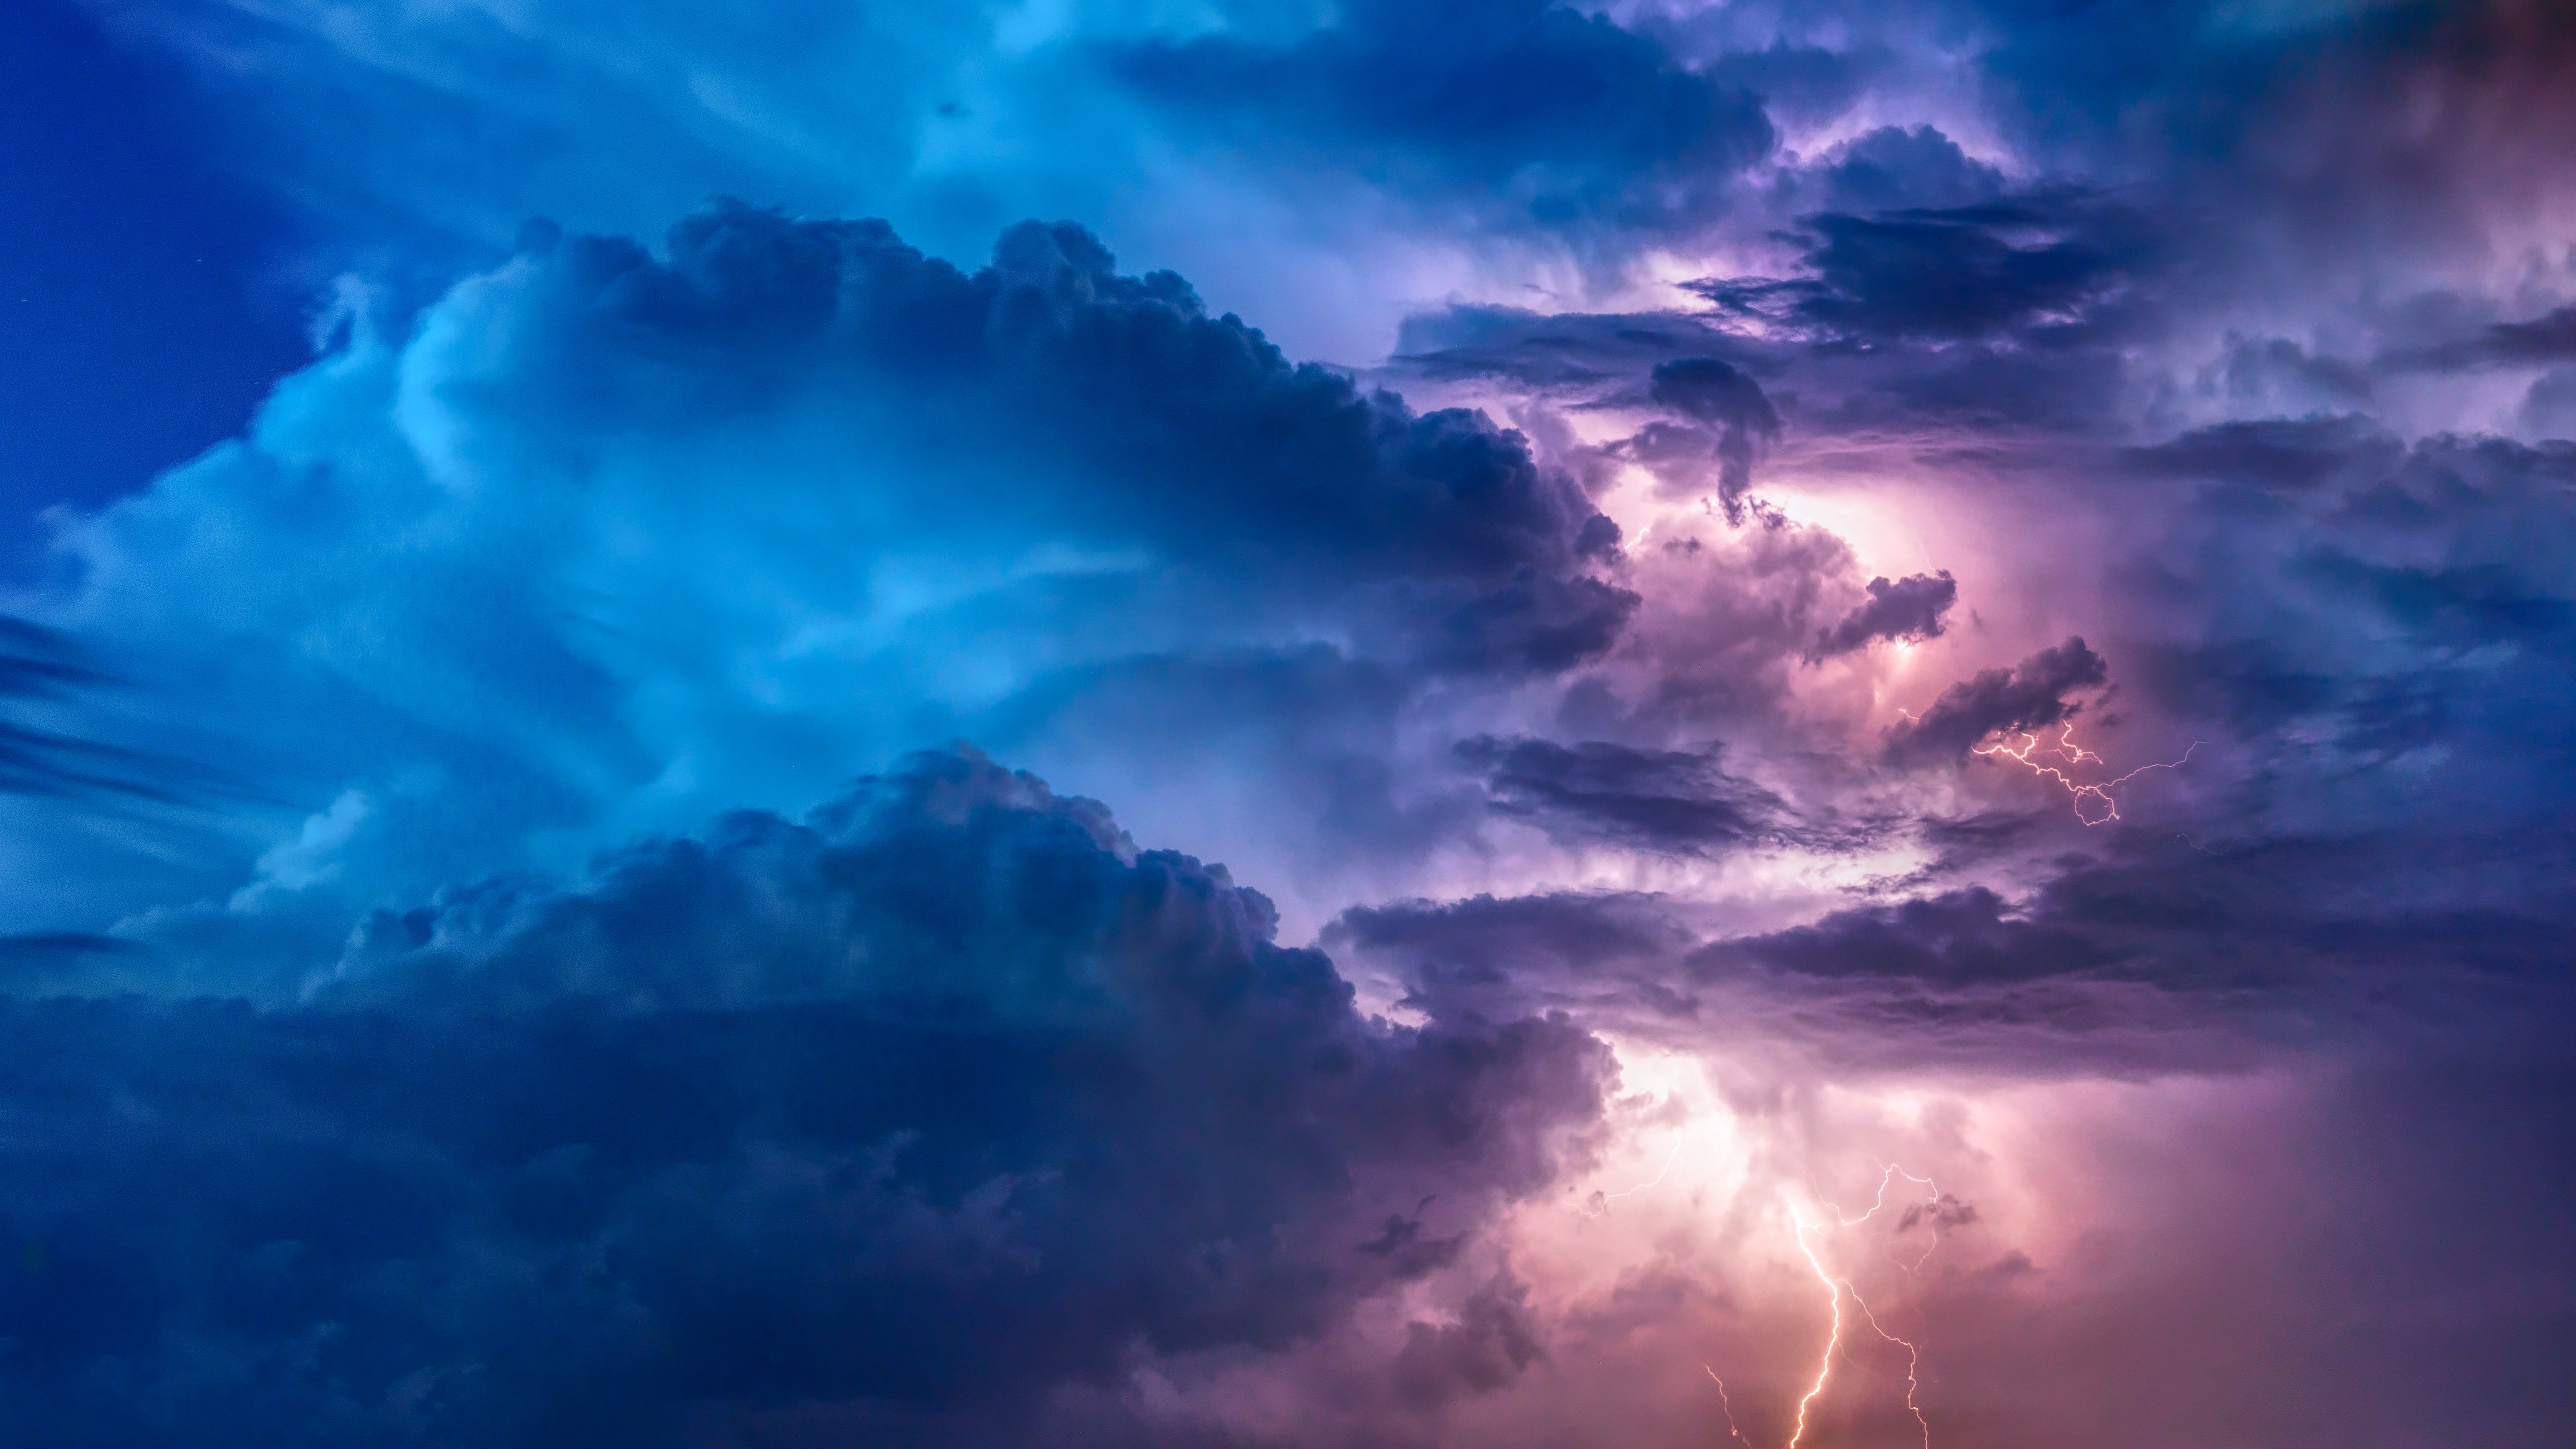 Thunderstorm Lightning 5k 720P HD 4k Wallpaper, Image, Background, Photo and Picture